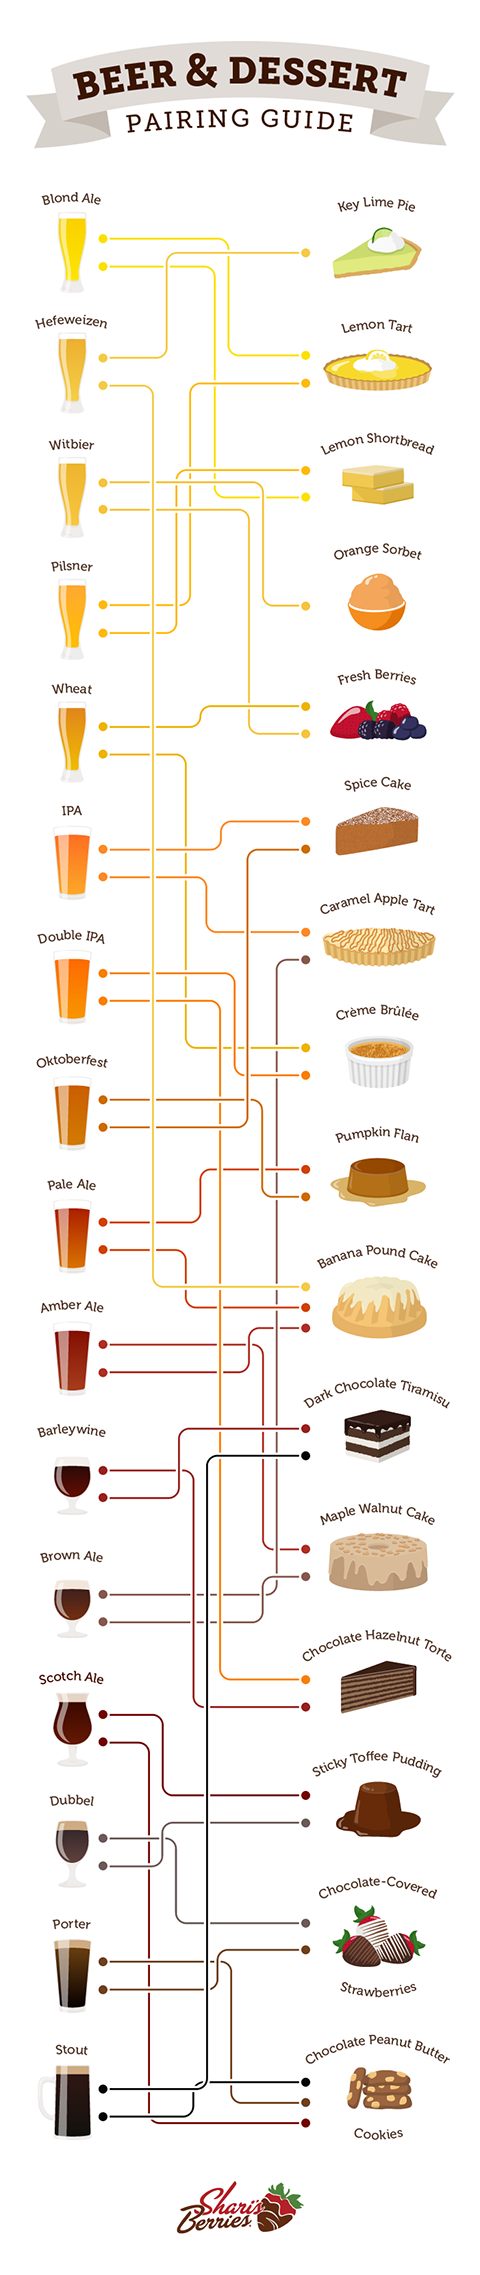 beer and dessert pairing guide